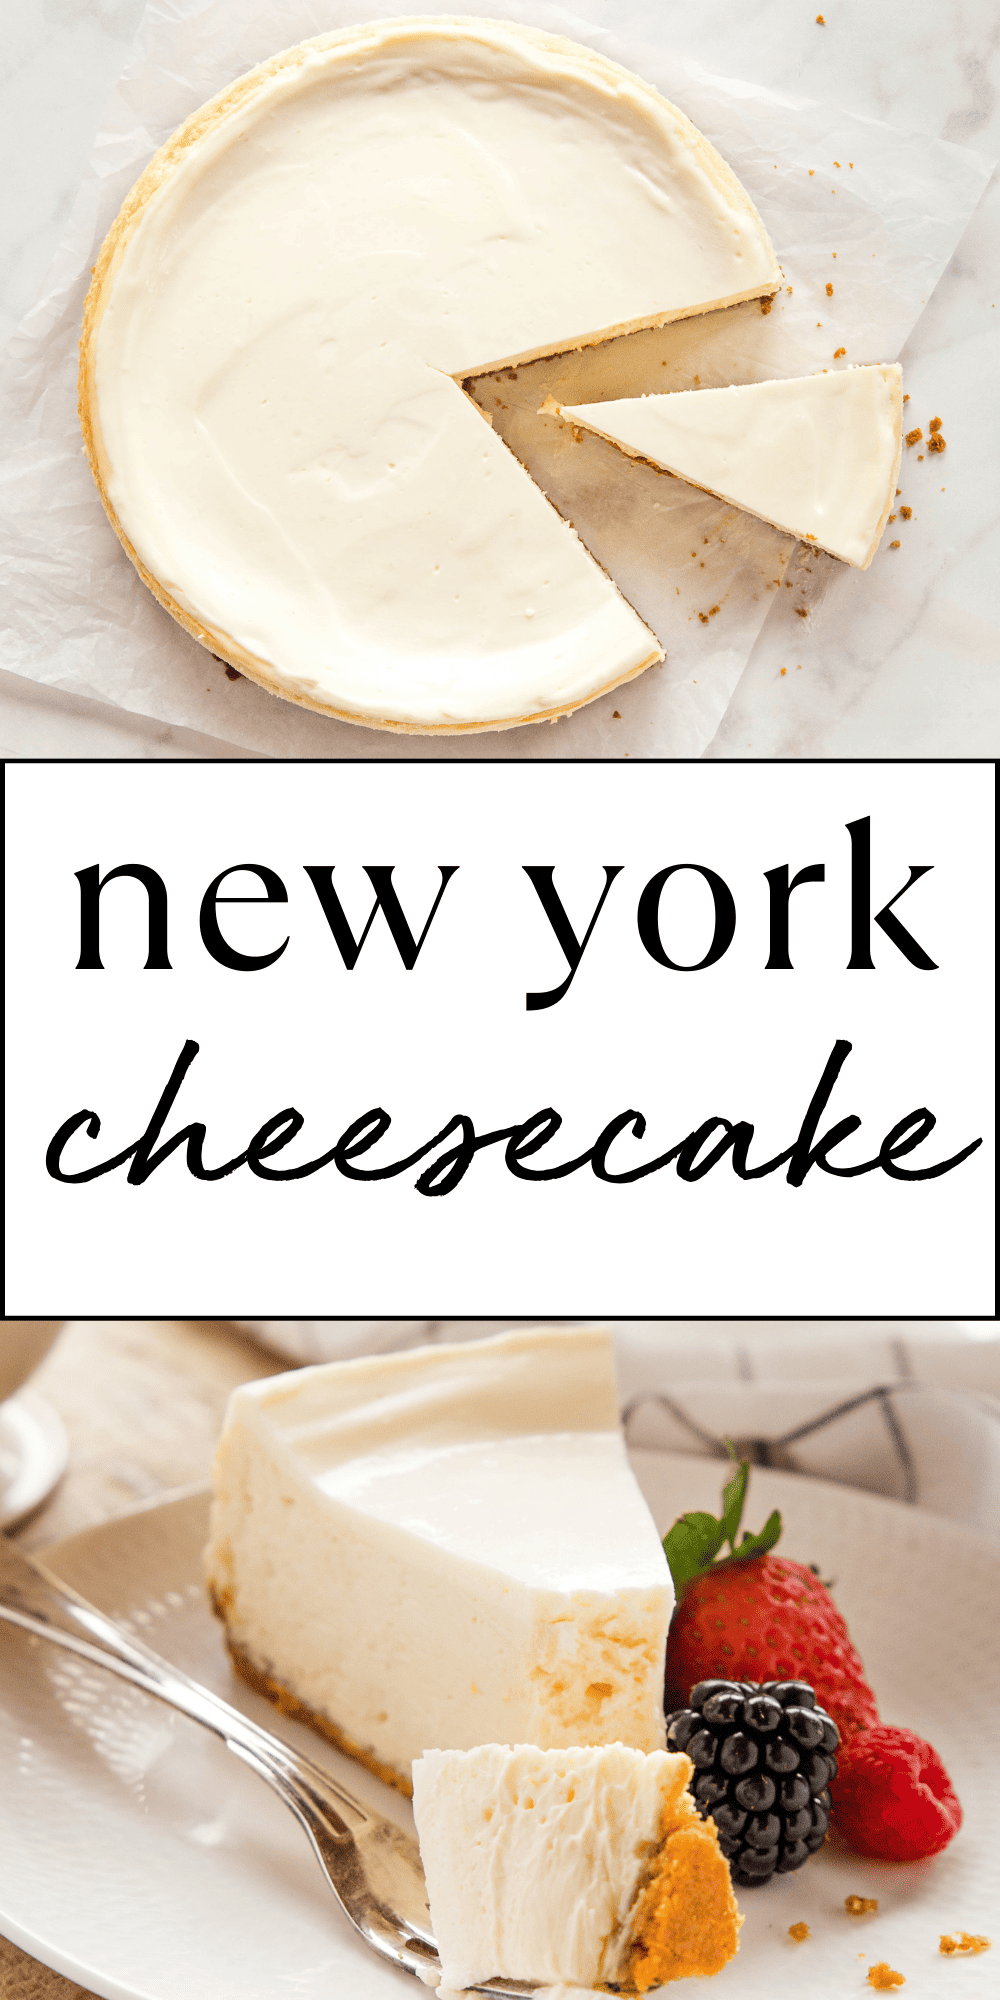 This New York Cheesecake recipe is a classic, simple and timeless dessert that's easy to make with simple ingredients. It's the BEST easy baked cheesecake recipe that's creamy, smooth and decadent - a NO-FAIL recipe thanks to our PRO tips & secrets for the perfect cheesecake every single time! Recipe from thebusybaker.ca! #cheesecake #newyorkcheesecake #easycheesecake #bakedcheesecake #cheesecakeprotips #cheesecaketips #bestevercheesecake via @busybakerblog